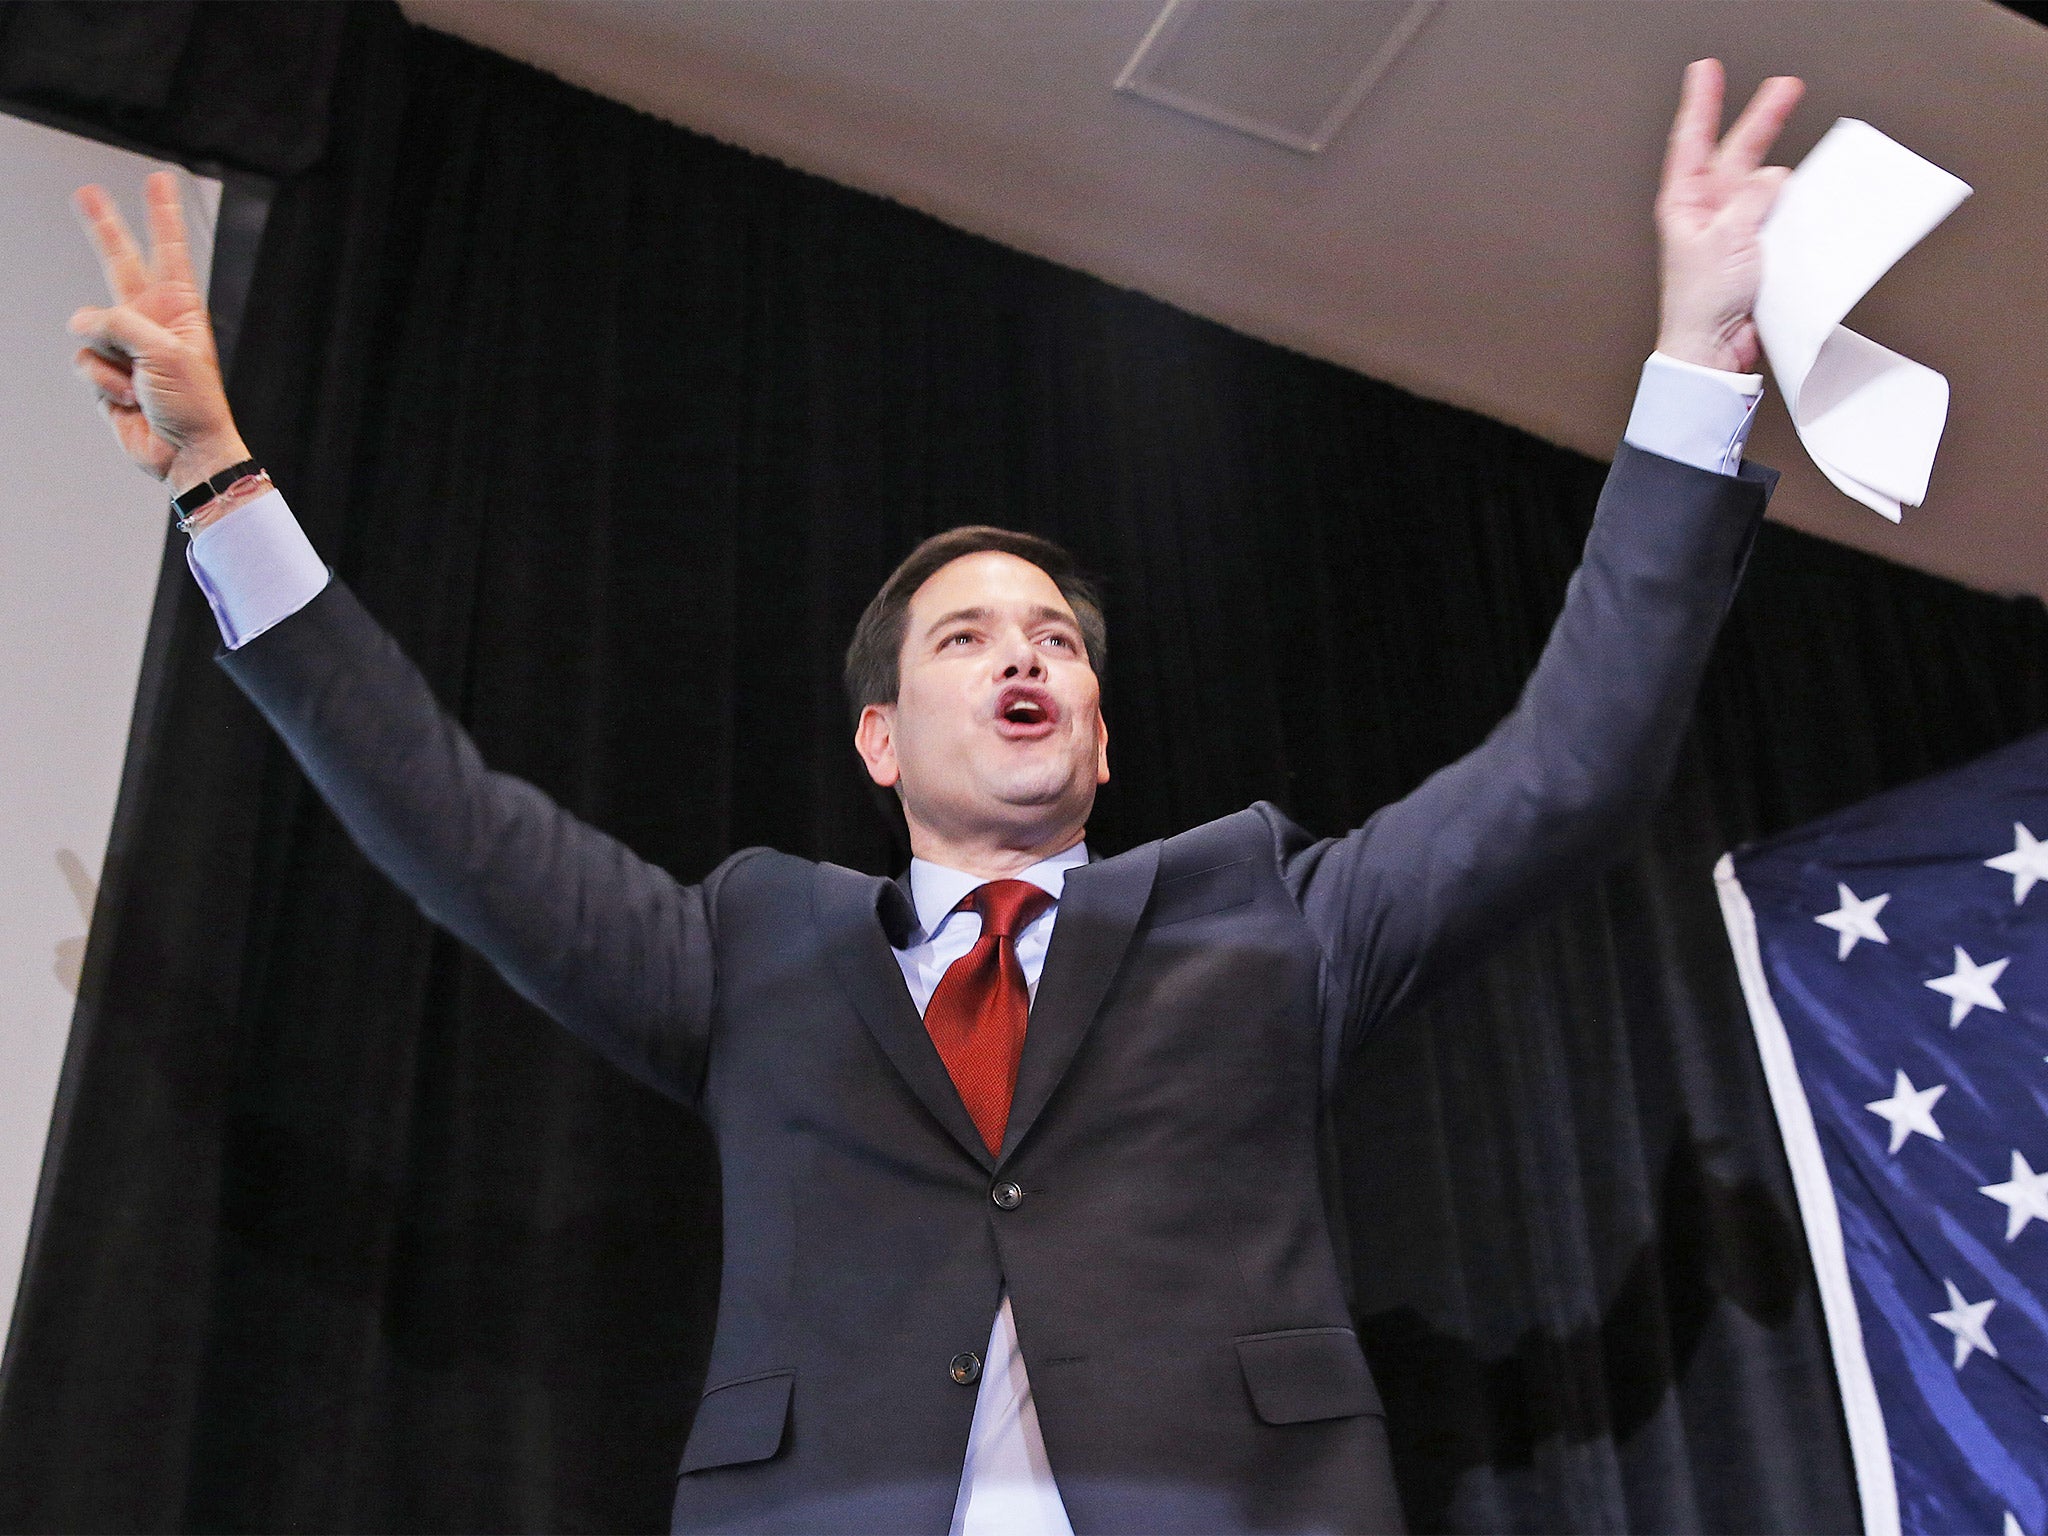 Marco Rubio, with Deb Fischer's support, would overturn a woman's right to choose